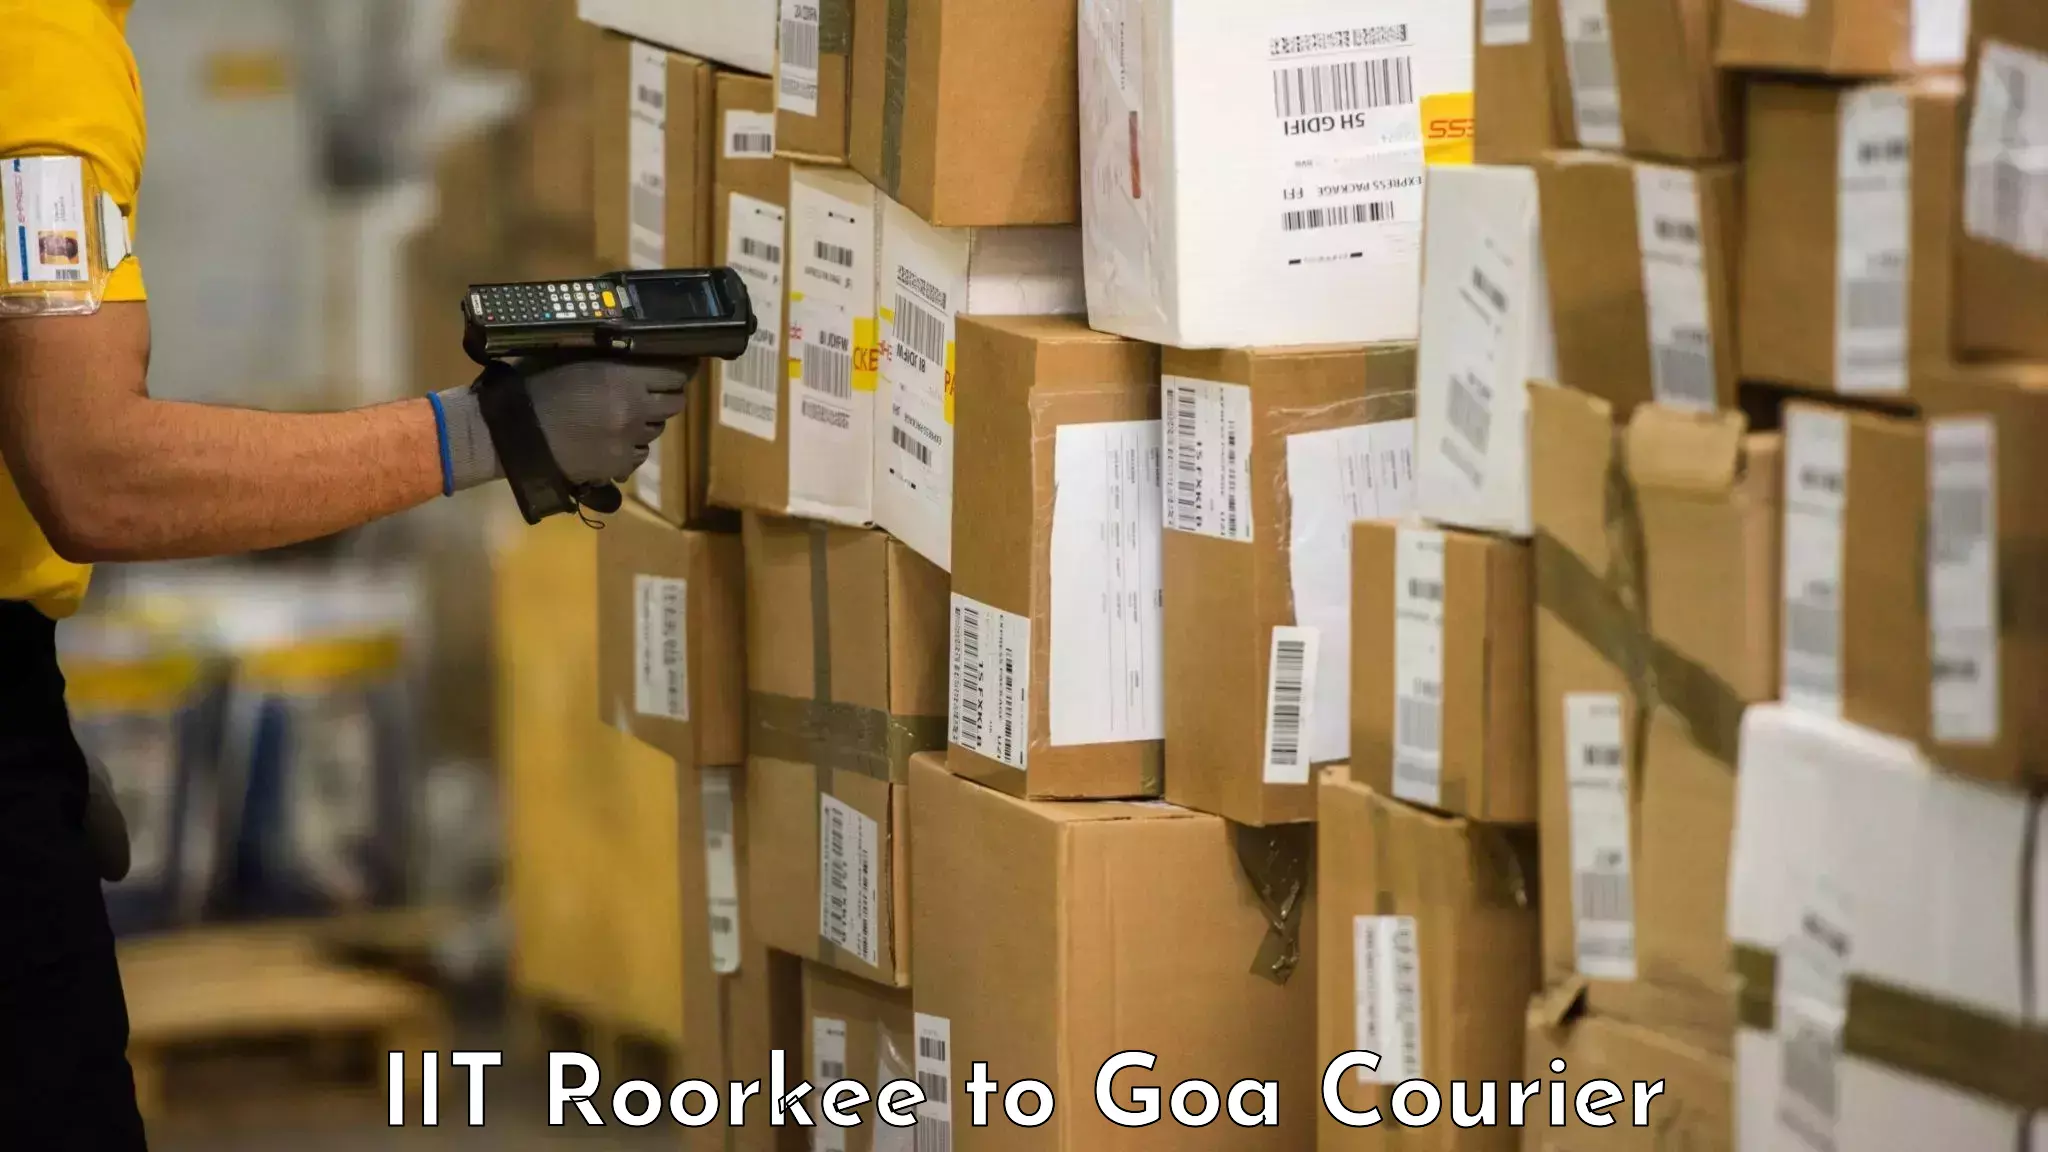 Luggage shipment tracking IIT Roorkee to South Goa